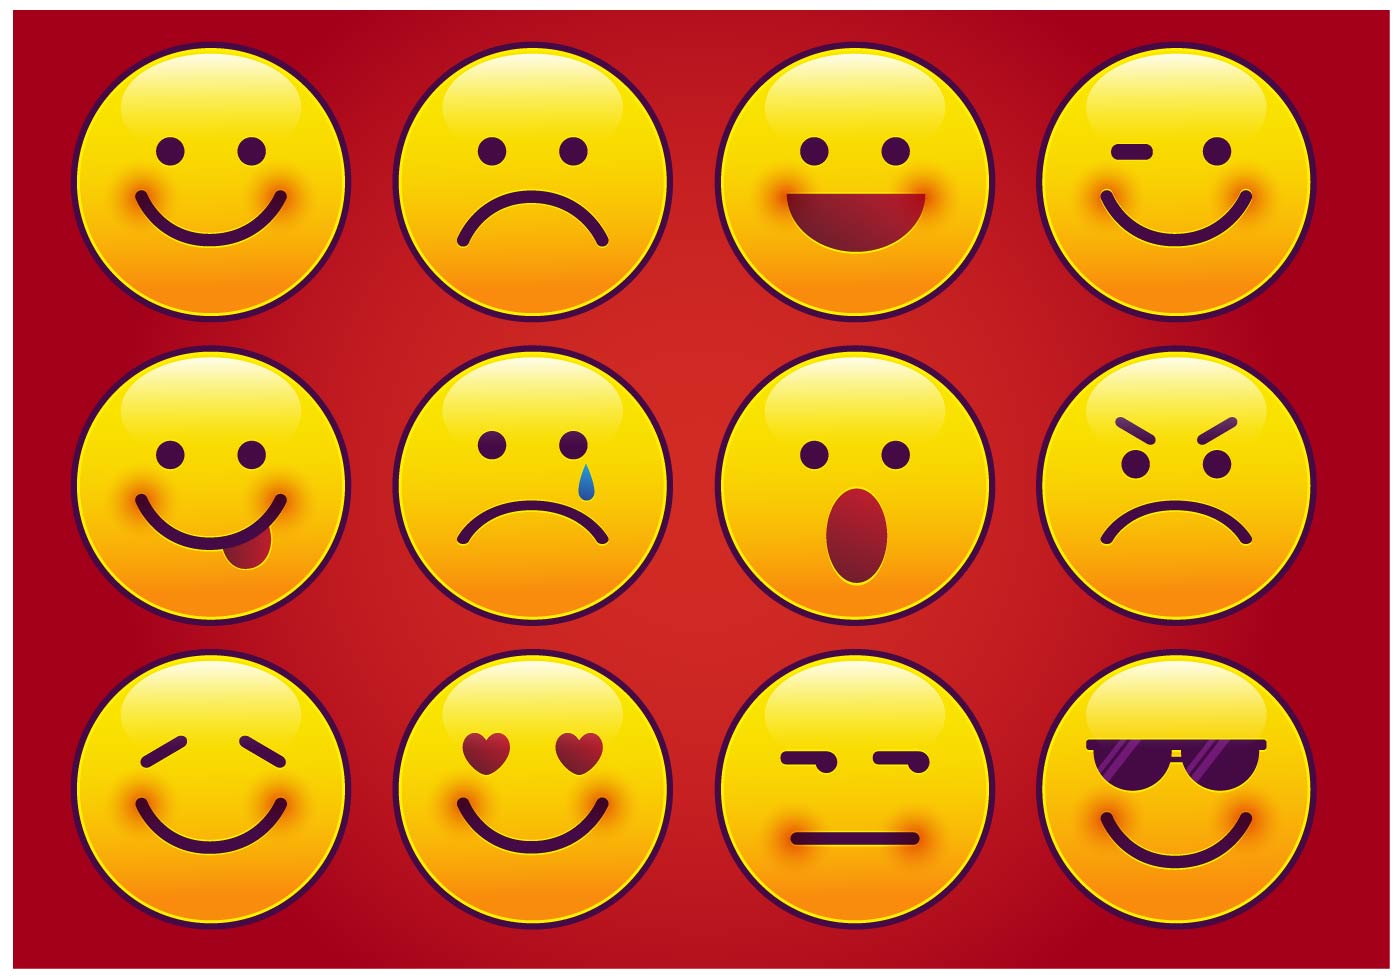 Smiley Face Free Vector Art 14432 Free Downloads